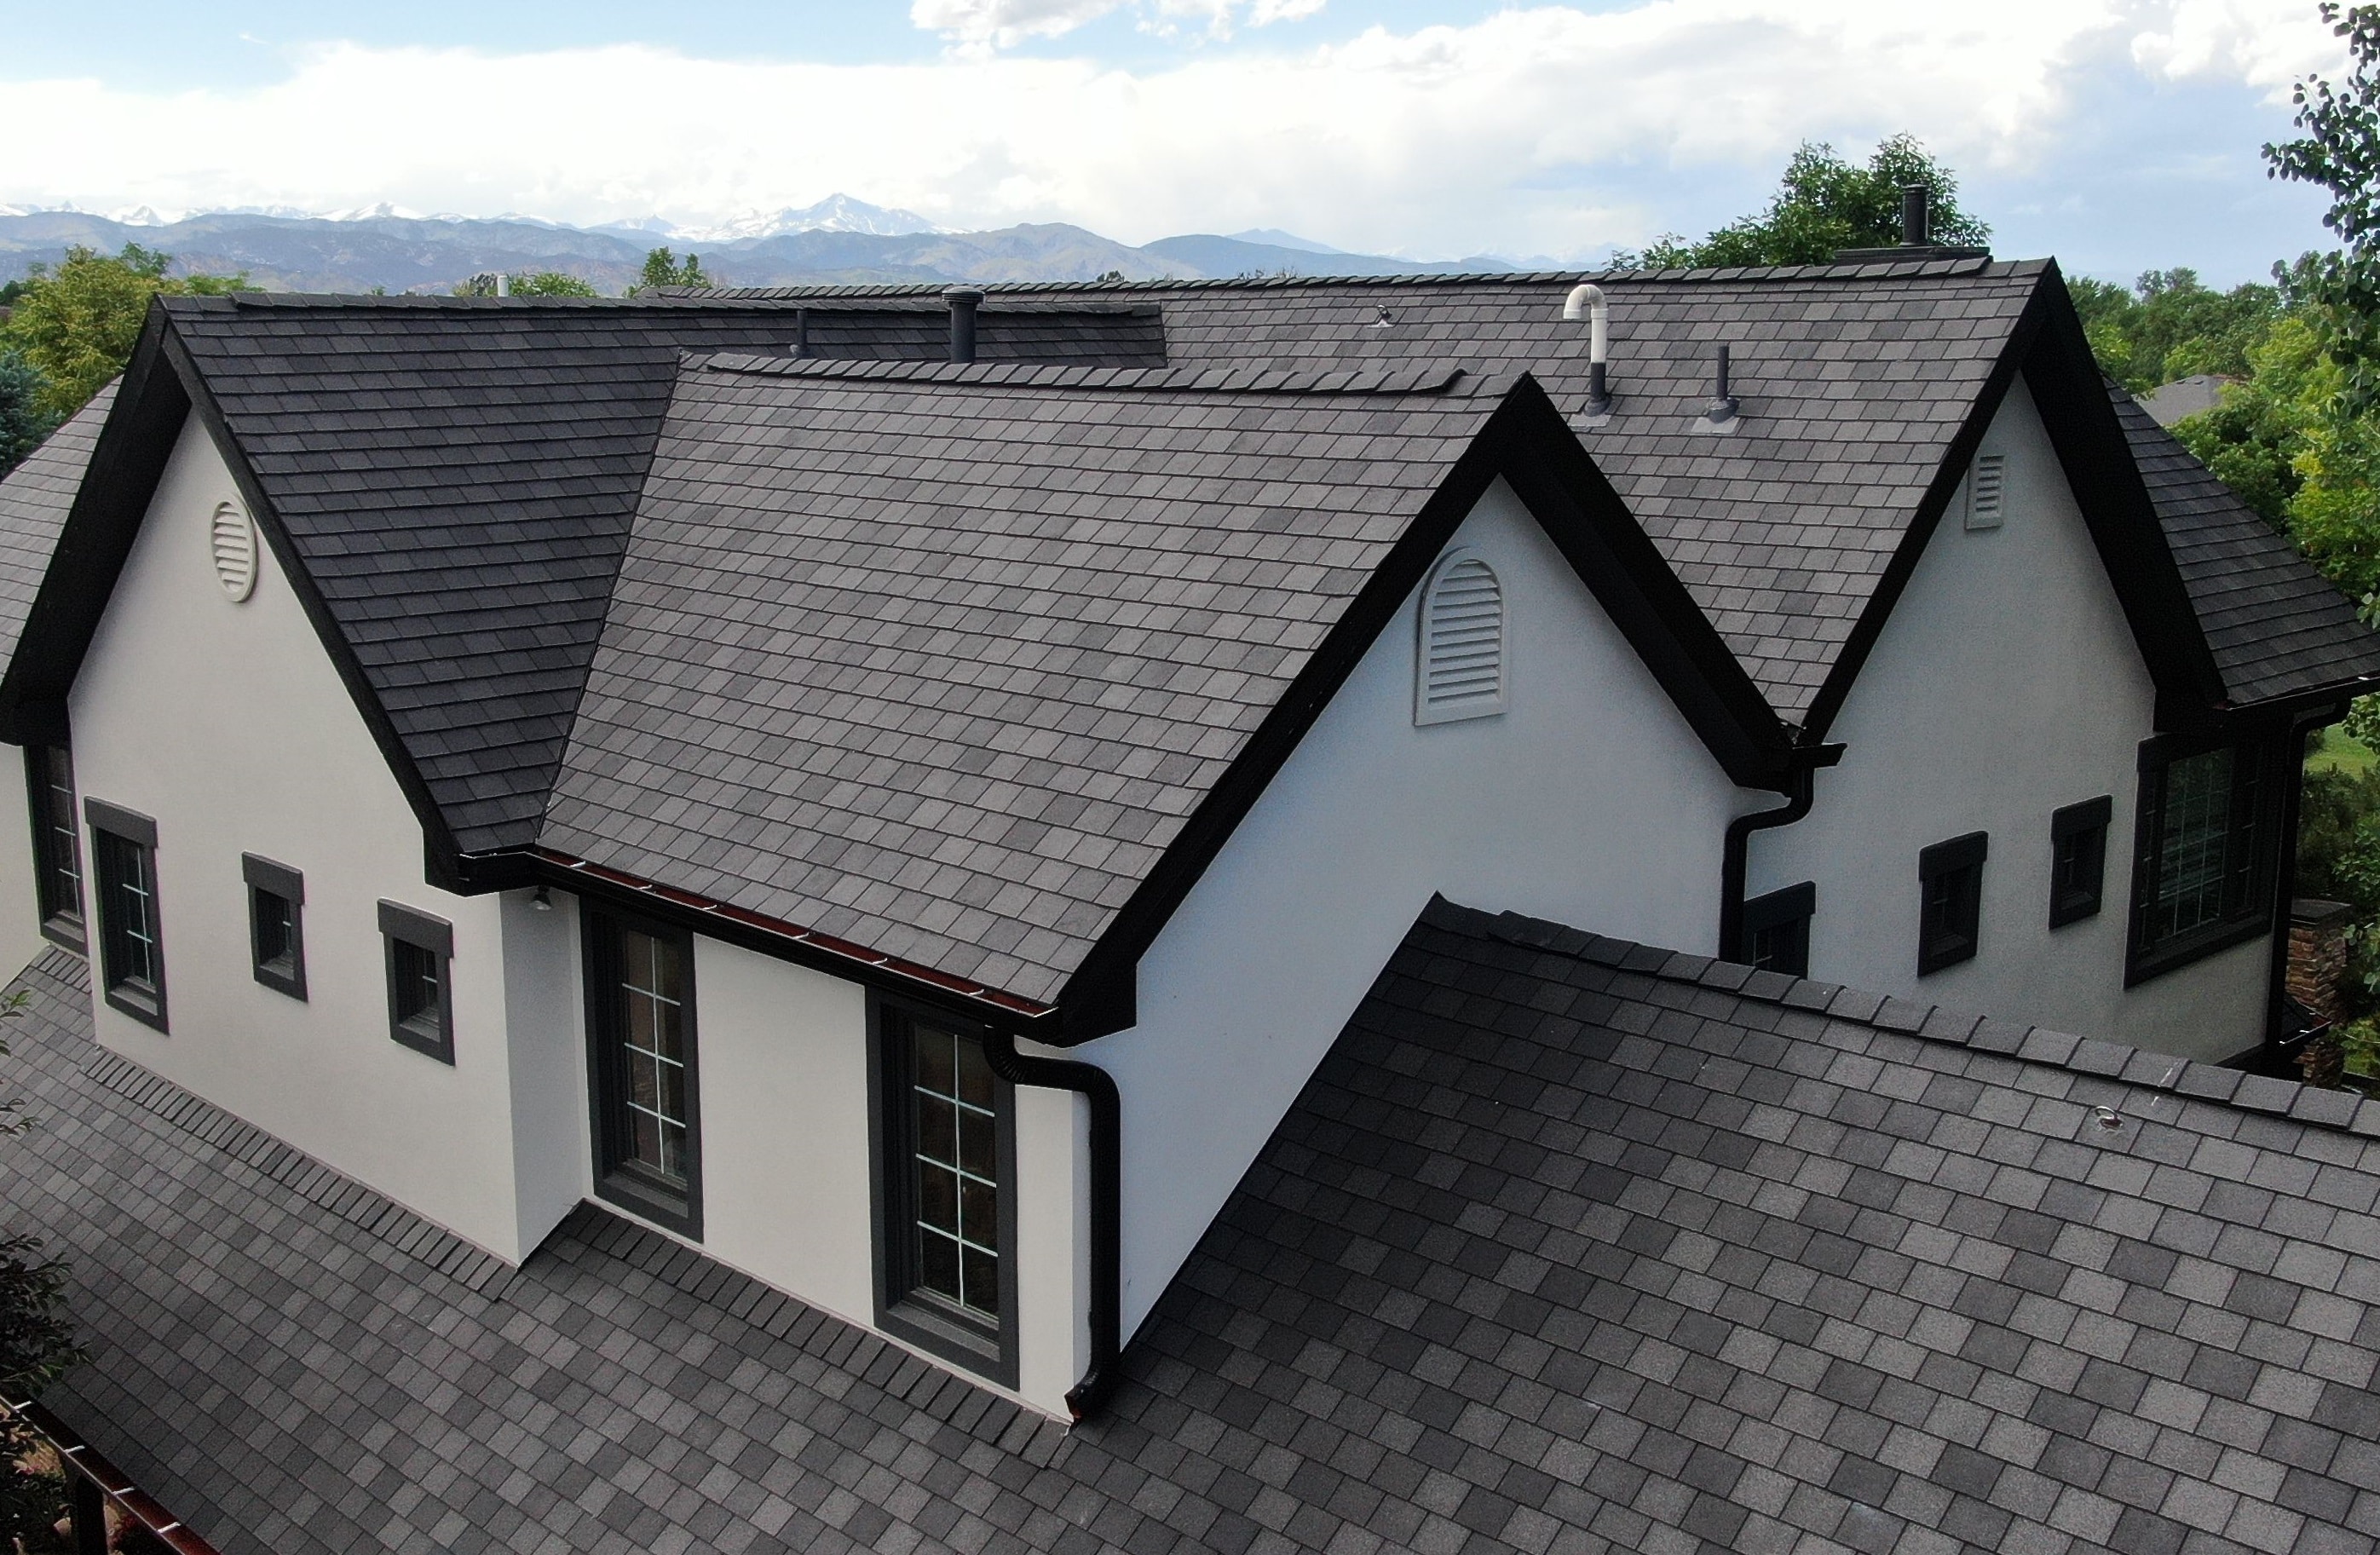 Synthetic Slate Roofing A Better, Imitation Slate Roof Tiles